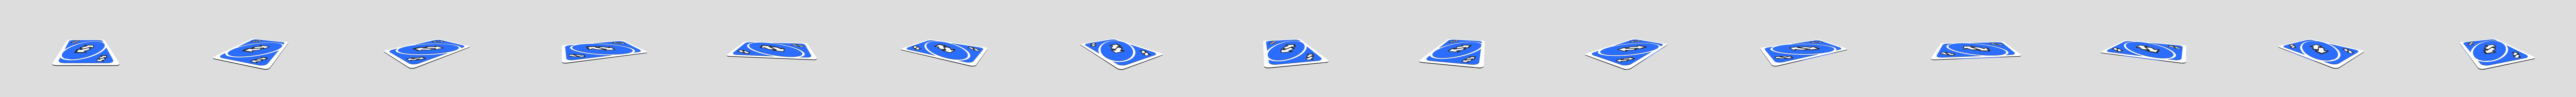 Uno Reverse Card, 3D CAD Model Library